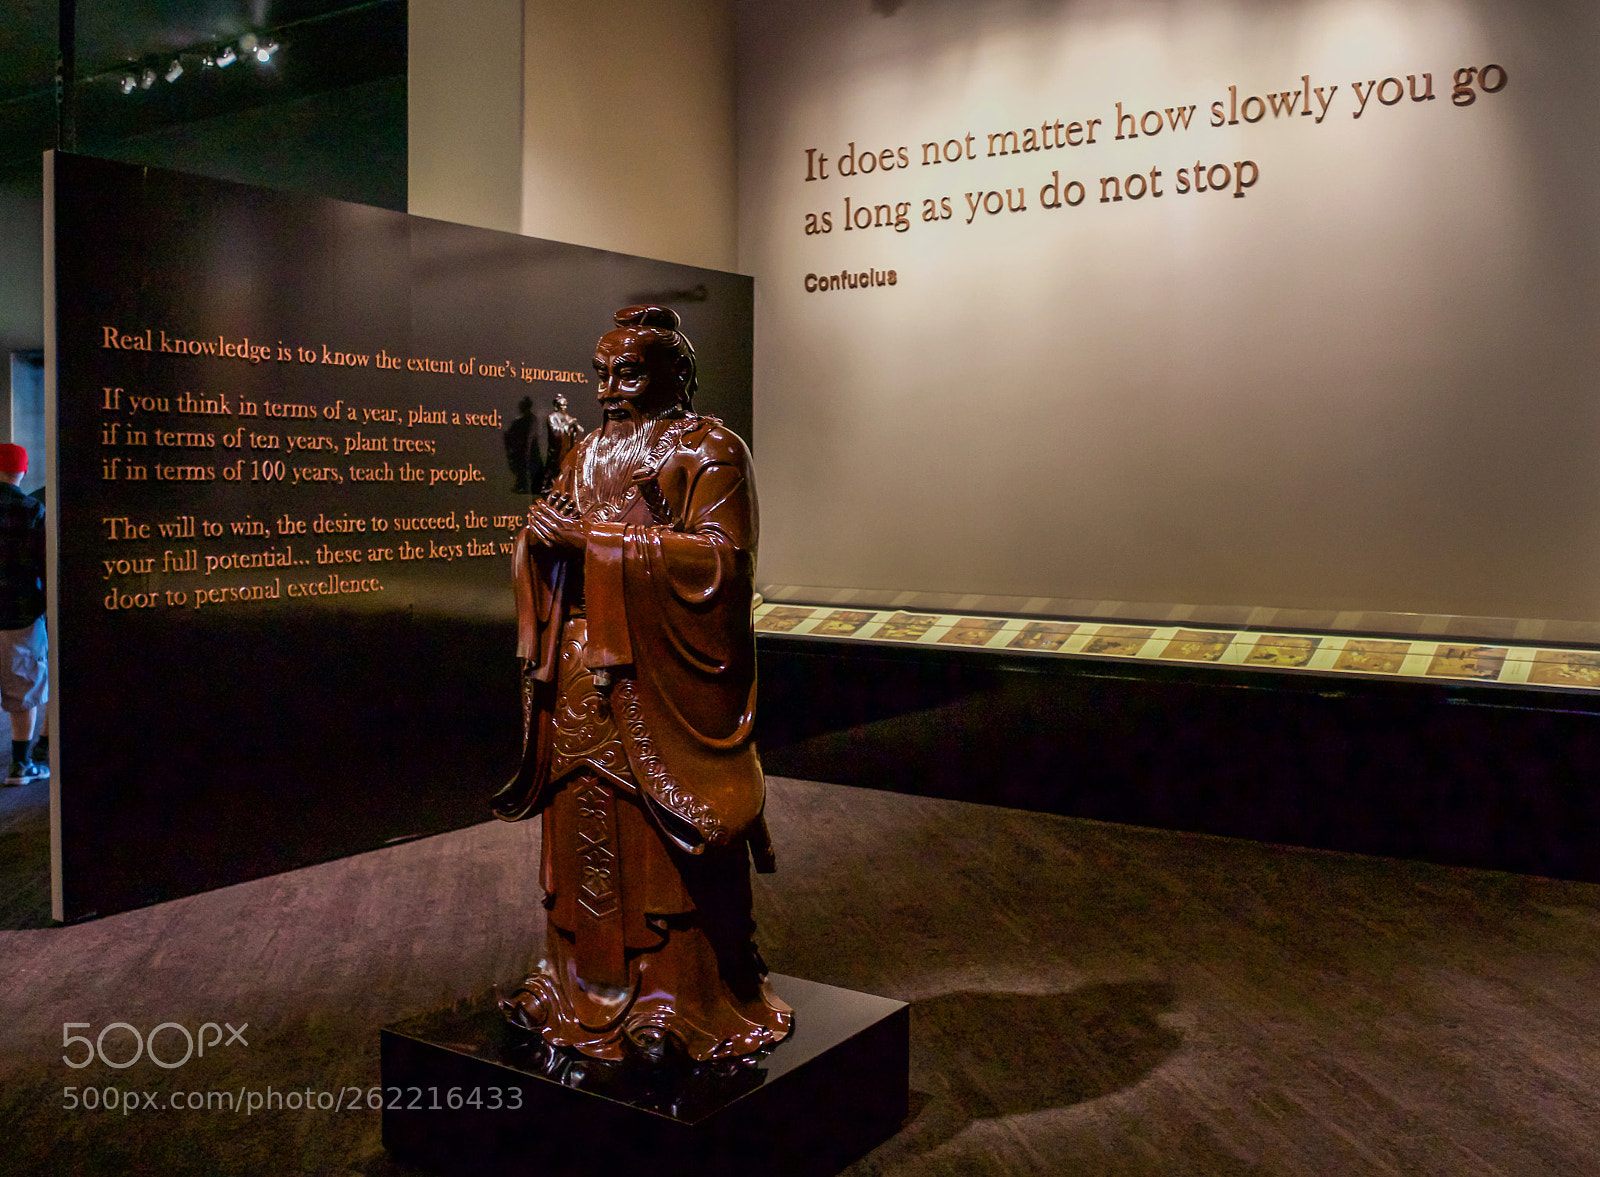 Sony a7 sample photo. Confucius the great philosopher photography